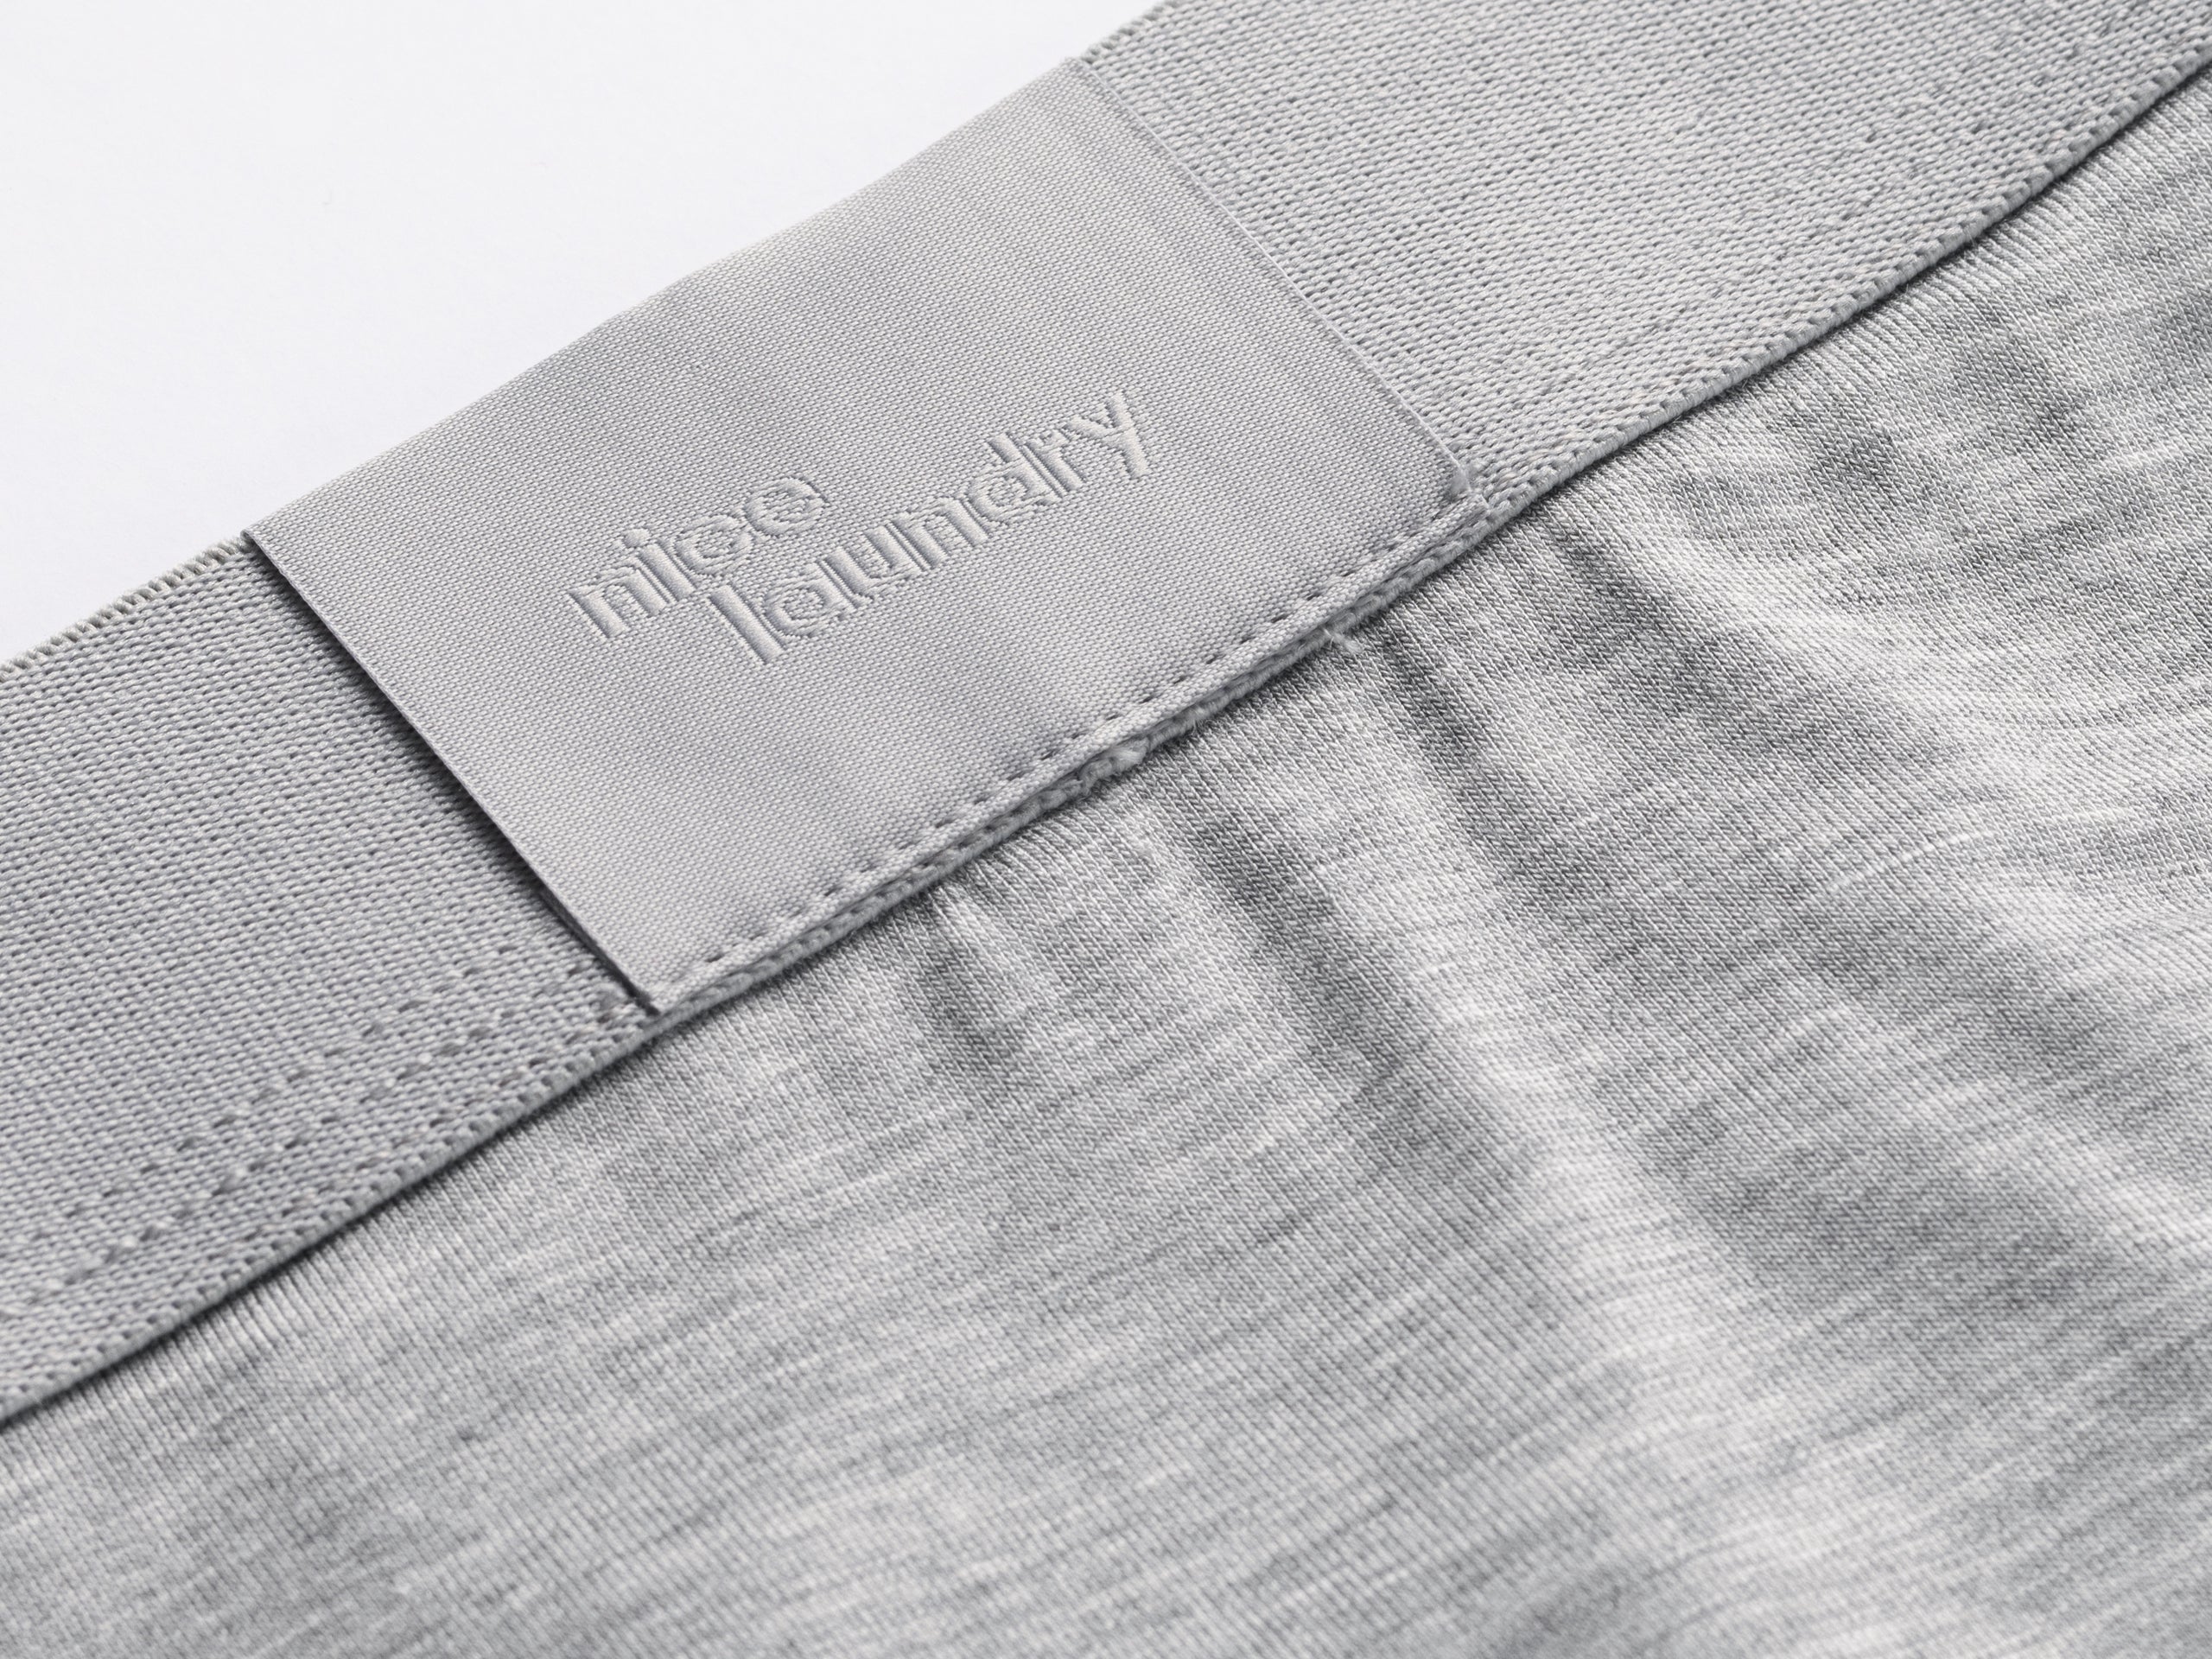 Close up detail shot of label on heather grey boxer brief.